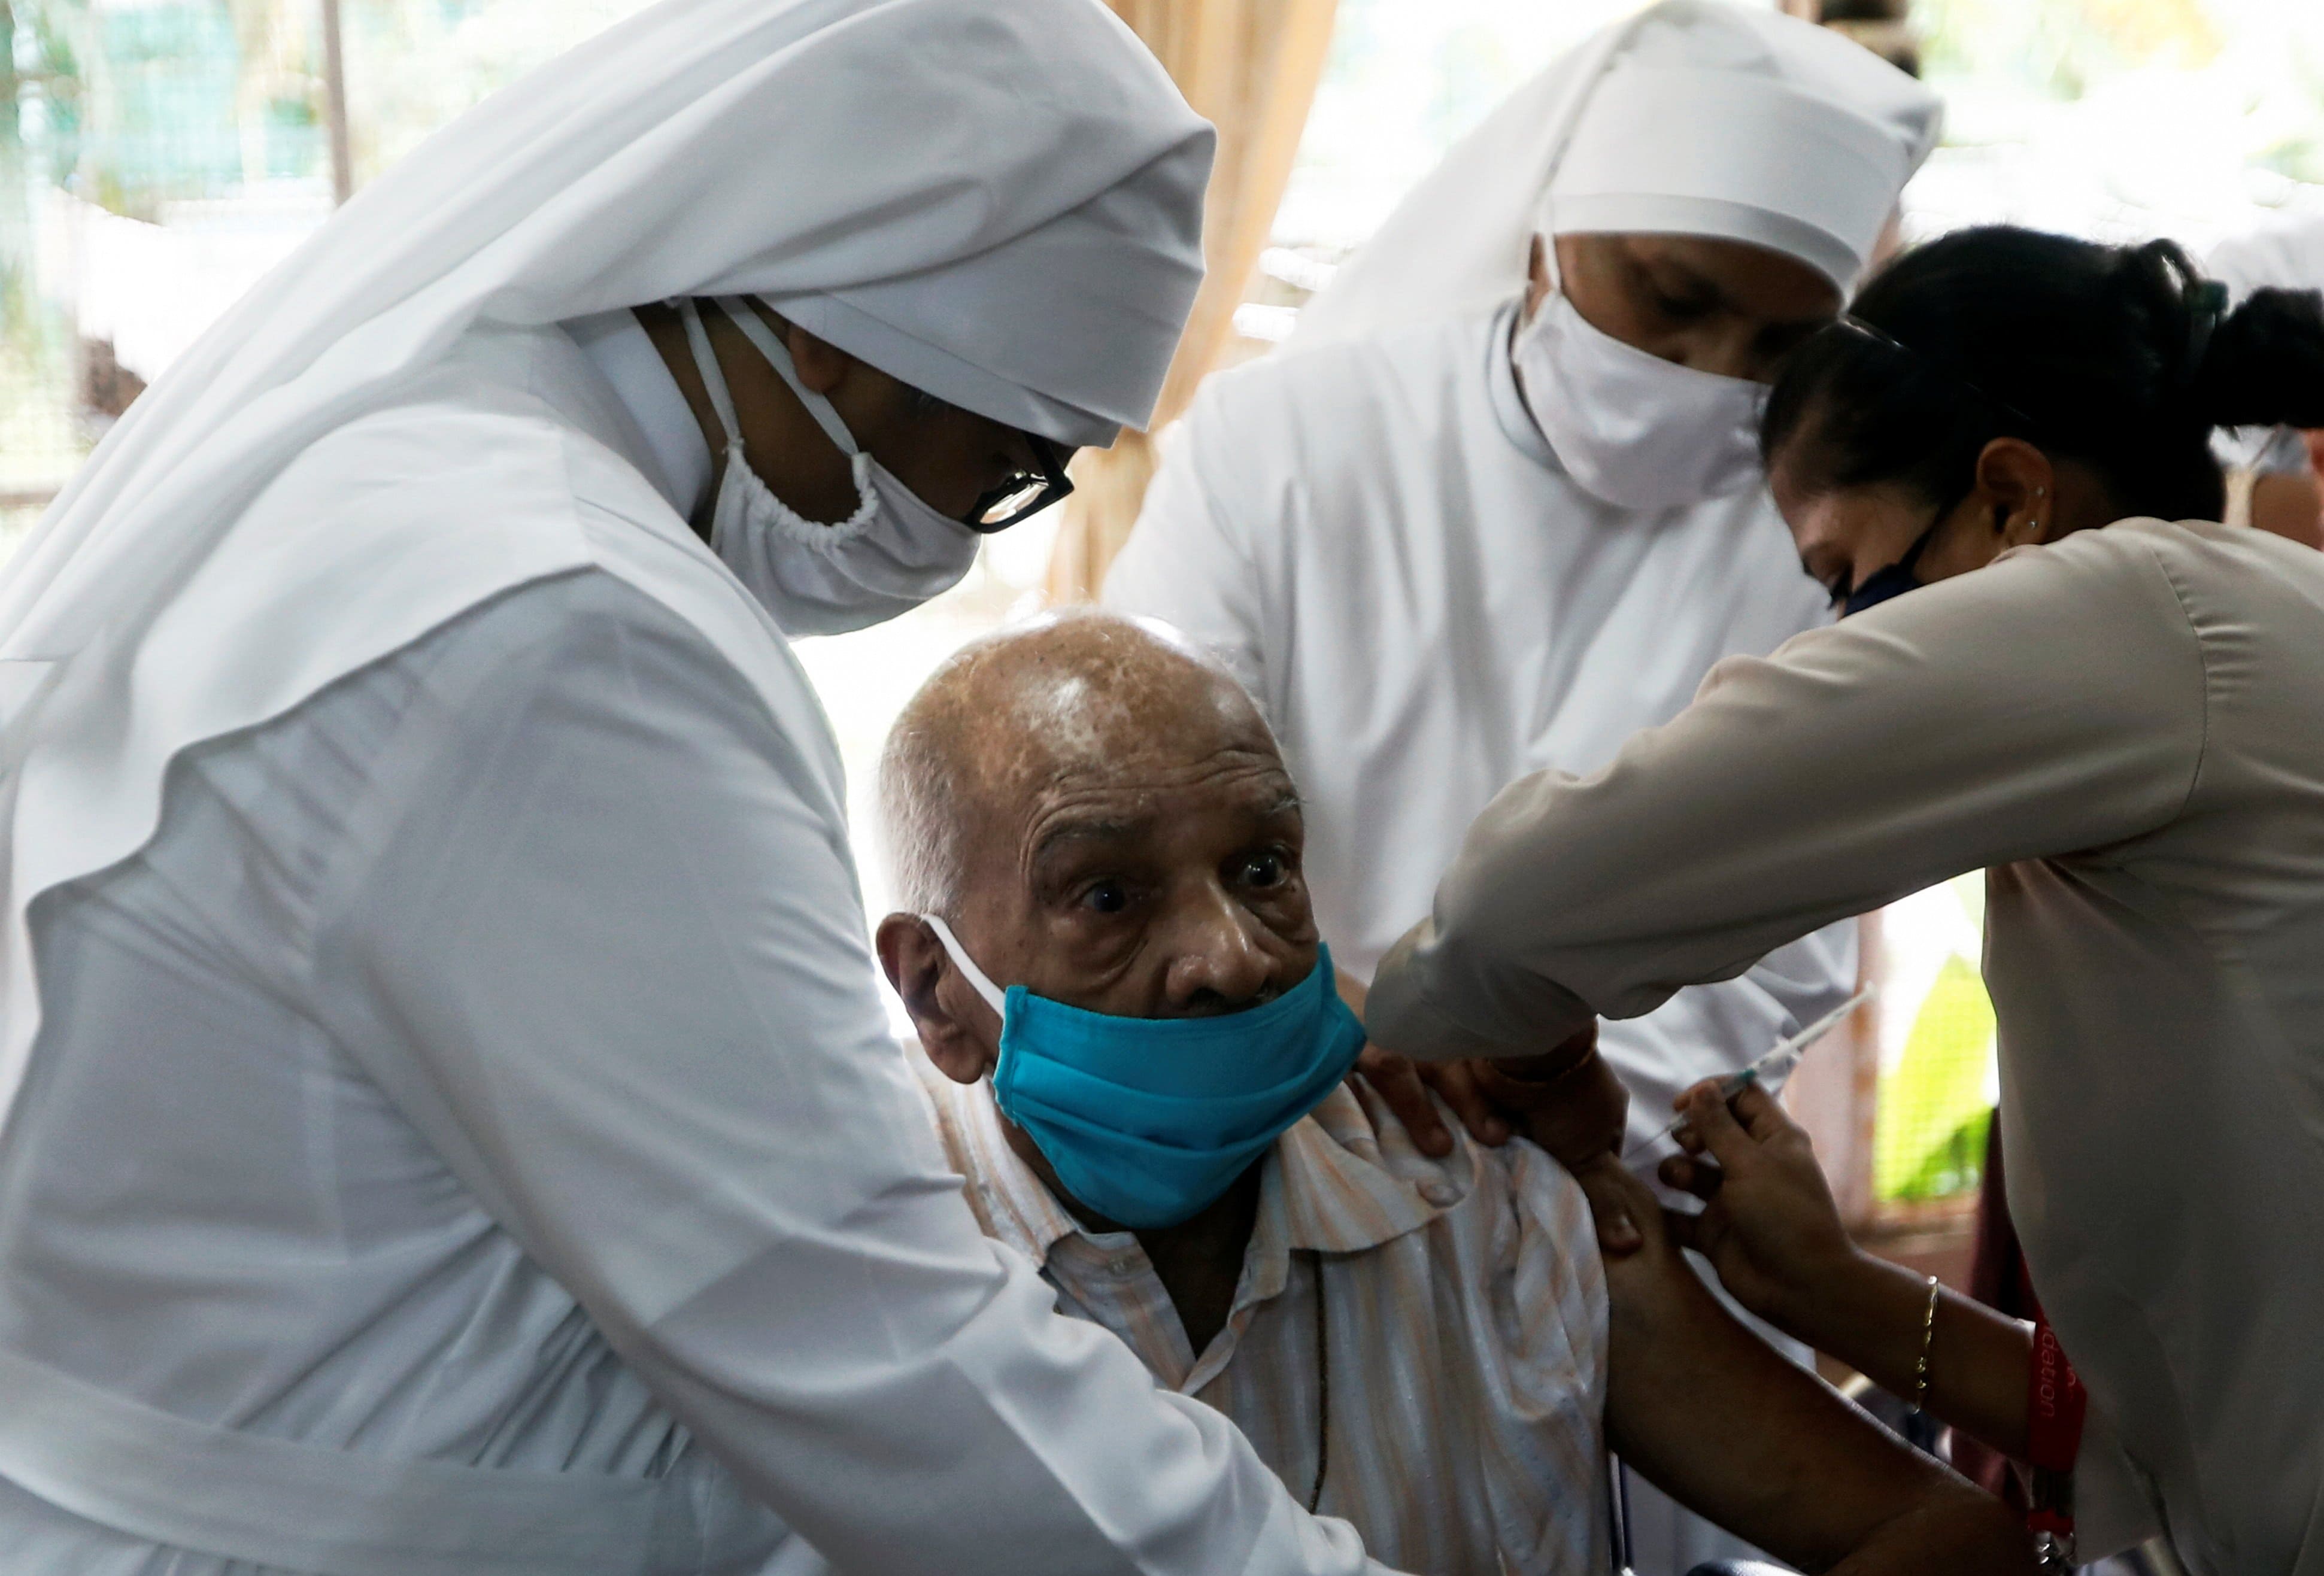 Nuns hold an elderly man as he receives a dose of the COVAXIN vaccine at a home for elderly in Mumbai, India, Aug. 2, 2021. The COVID-19 vaccine is manufactured by Bharat Biotech. (CNS photo/Francis Mascarenhas, Reuters)